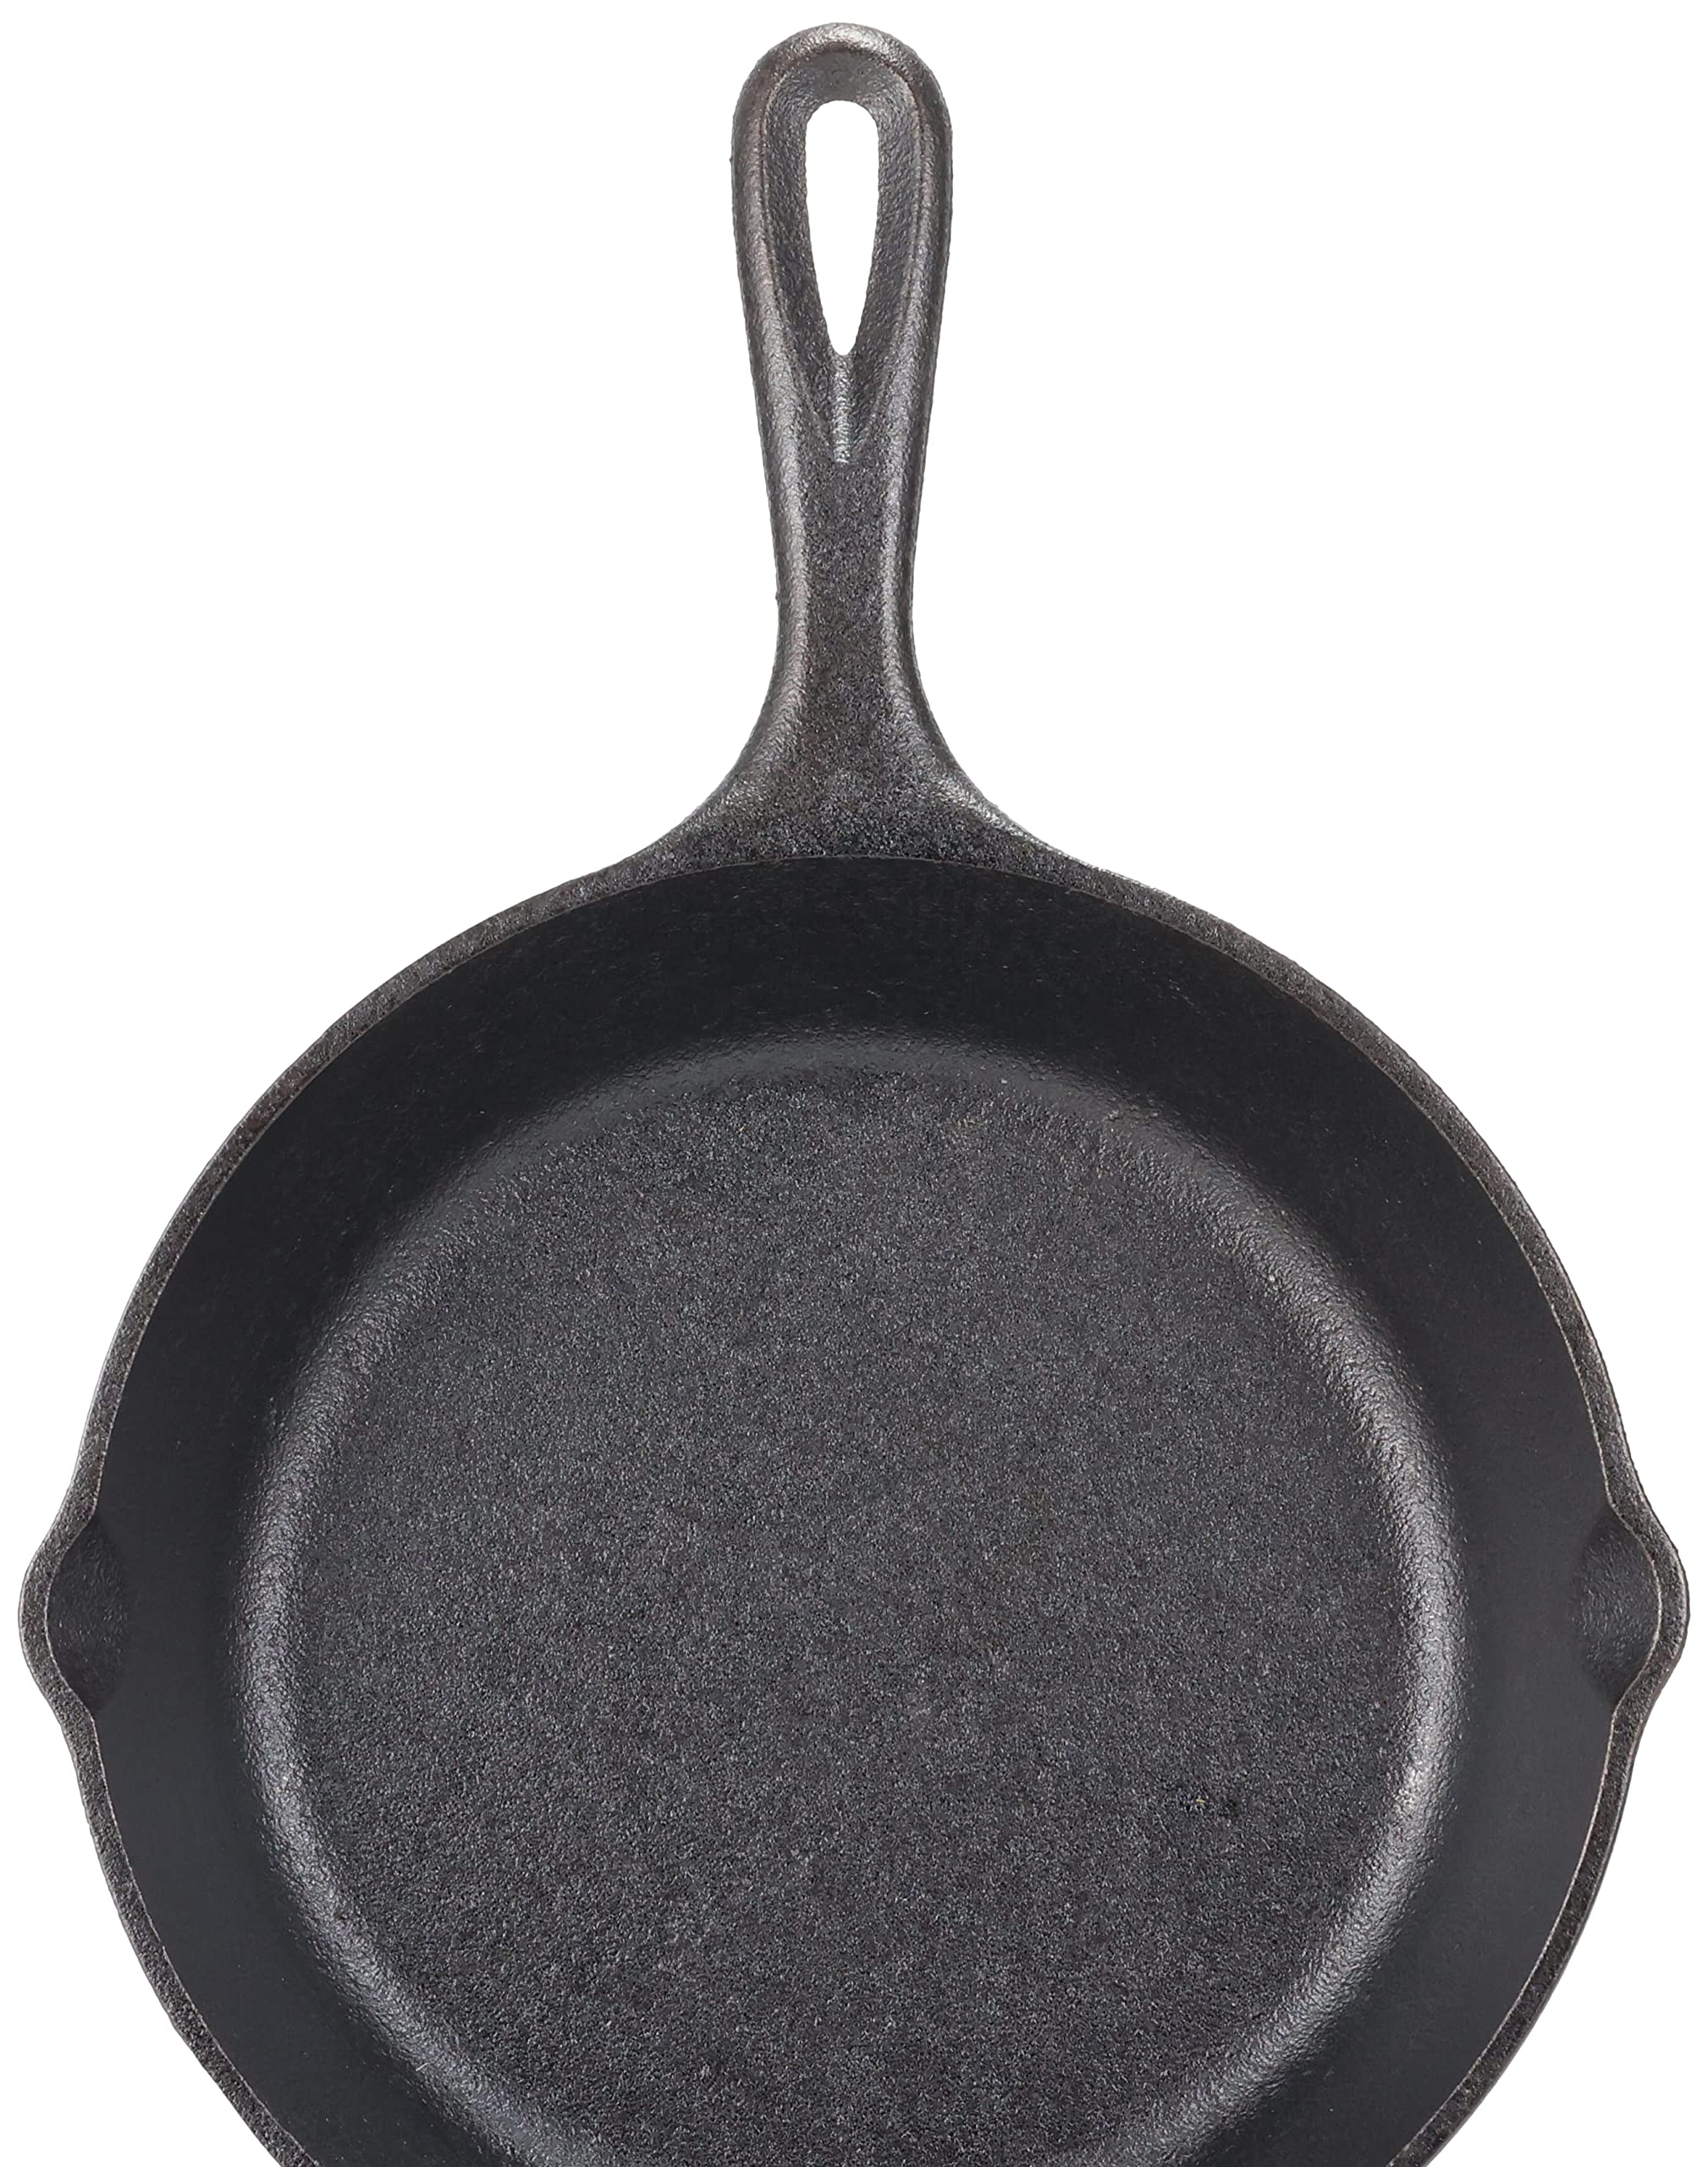 Lodge 8 Inch Cast Iron Pre-Seasoned Skillet – Signature Teardrop Handle - Use in the Oven, on the Stove, on the Grill, or Over a Campfire, Black